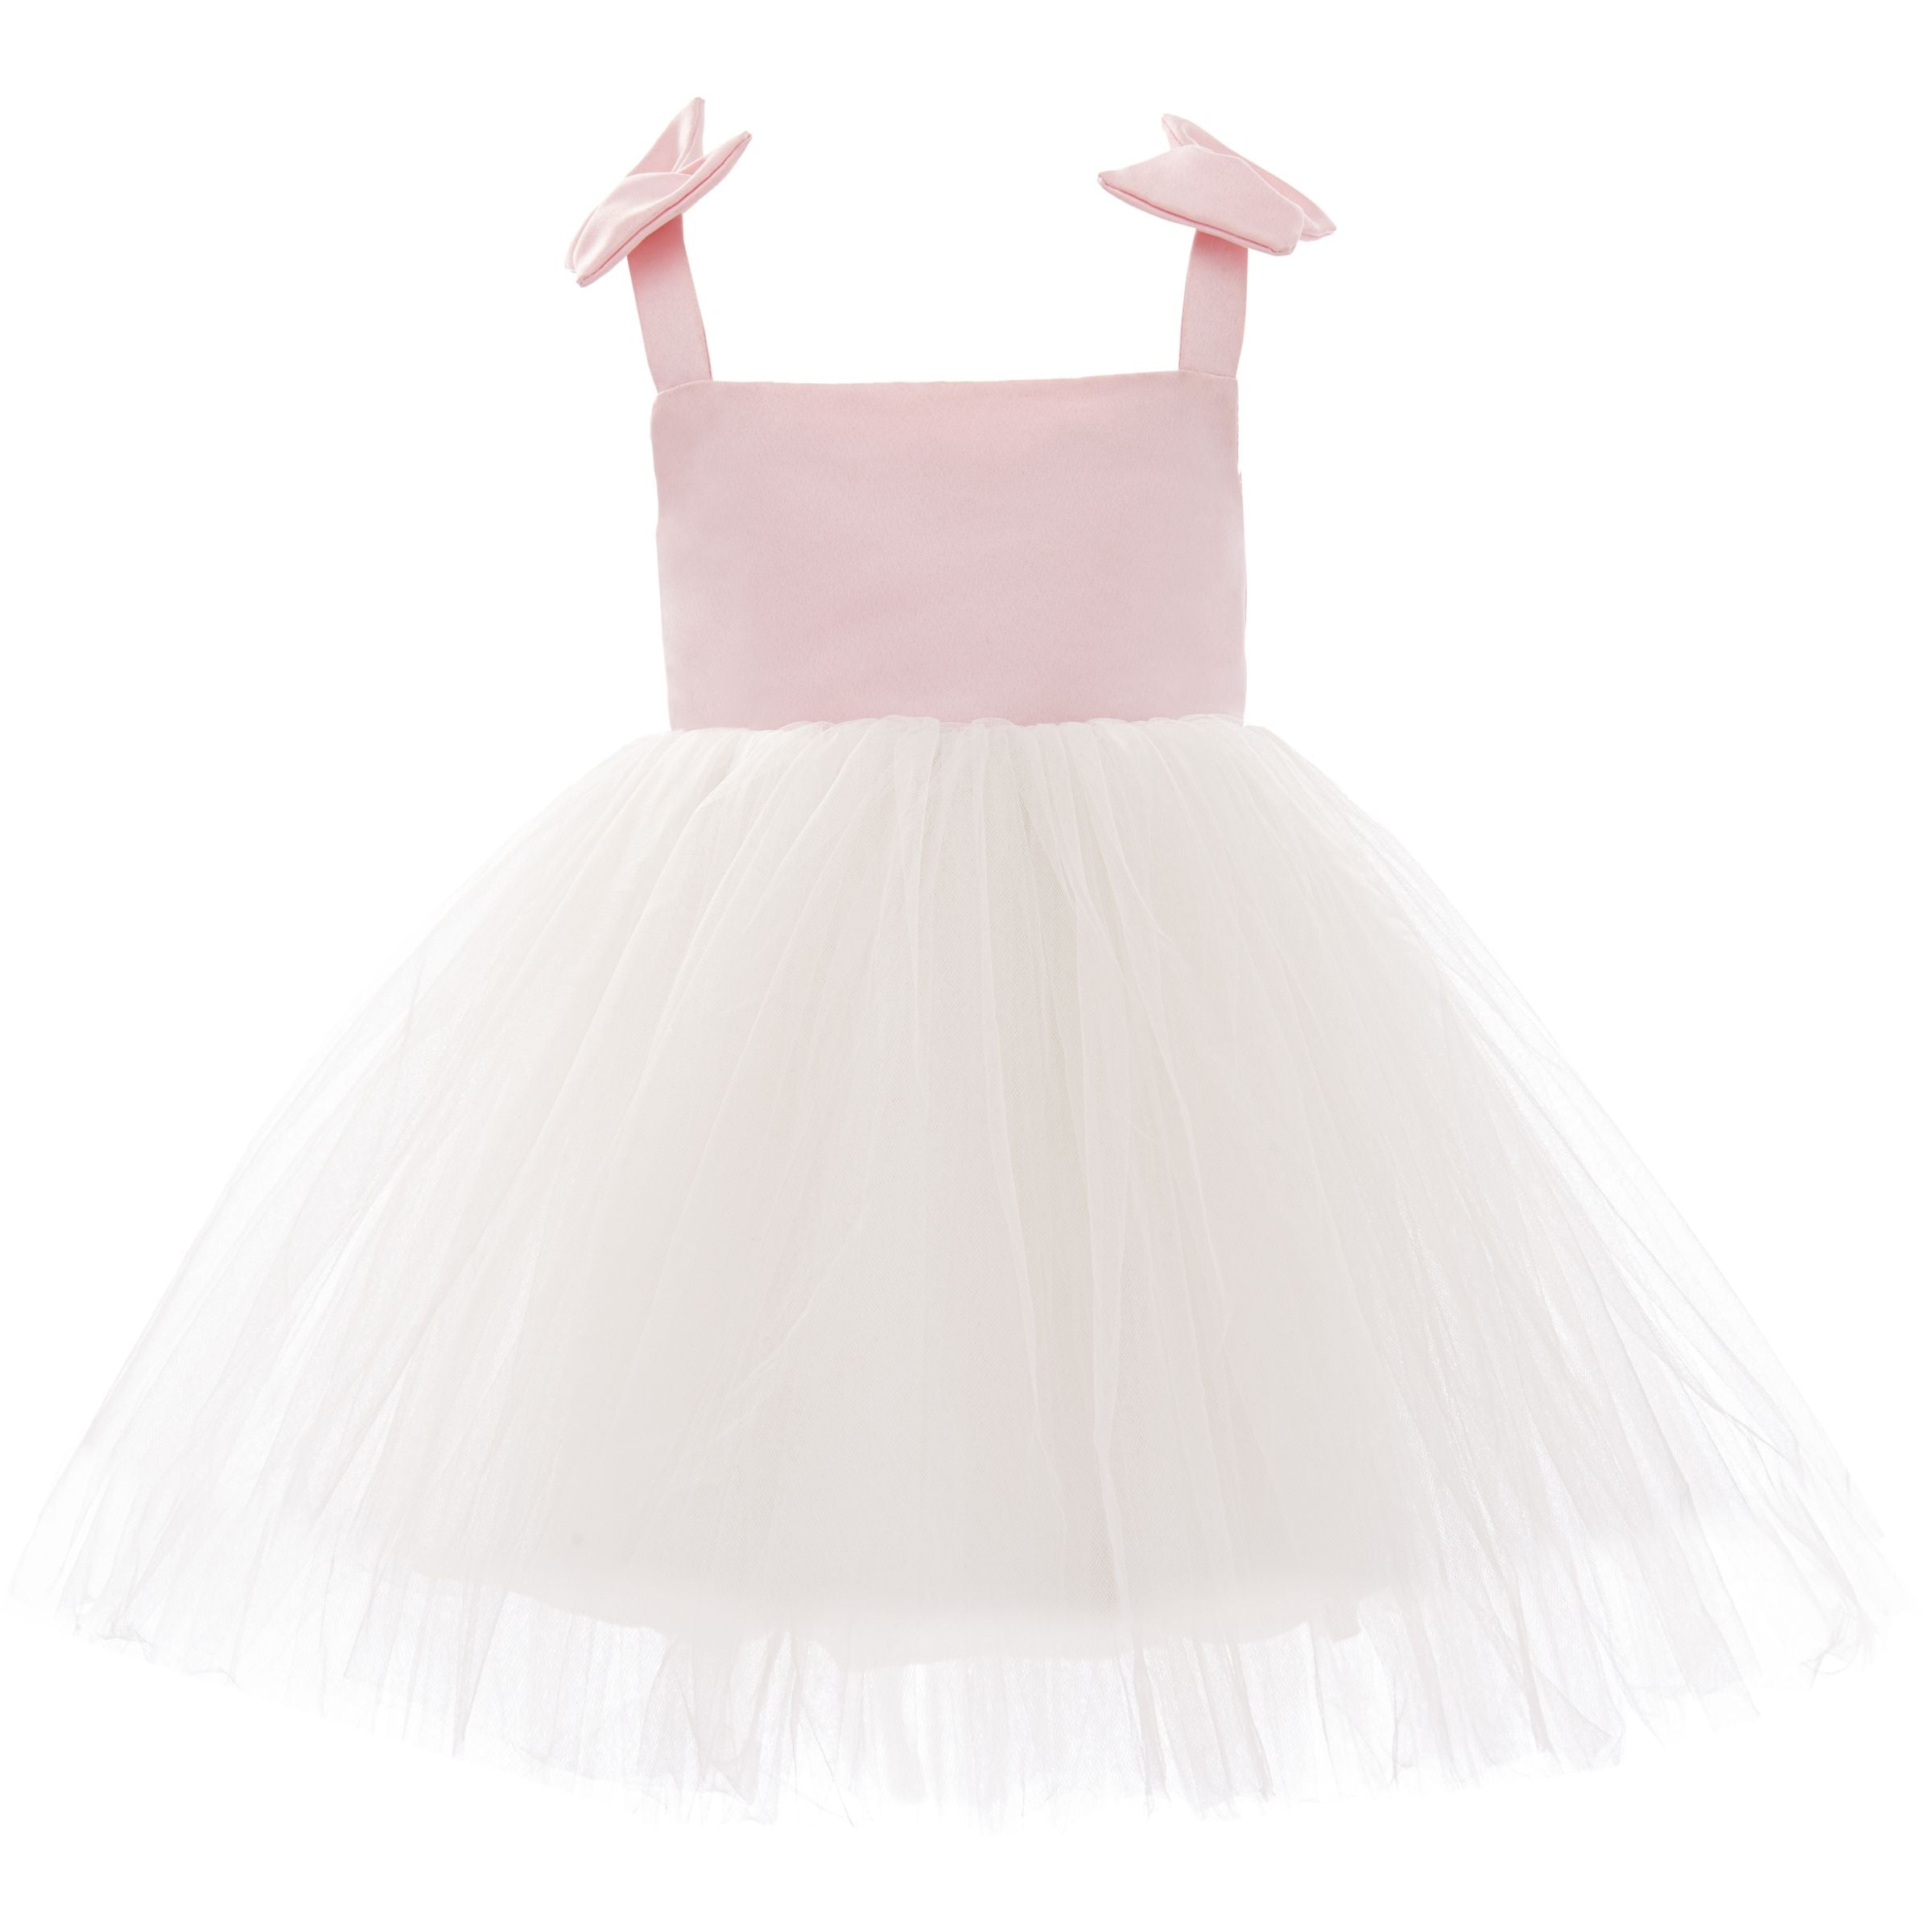 Pink Janie Bow Strap Dress - Tulleen.com